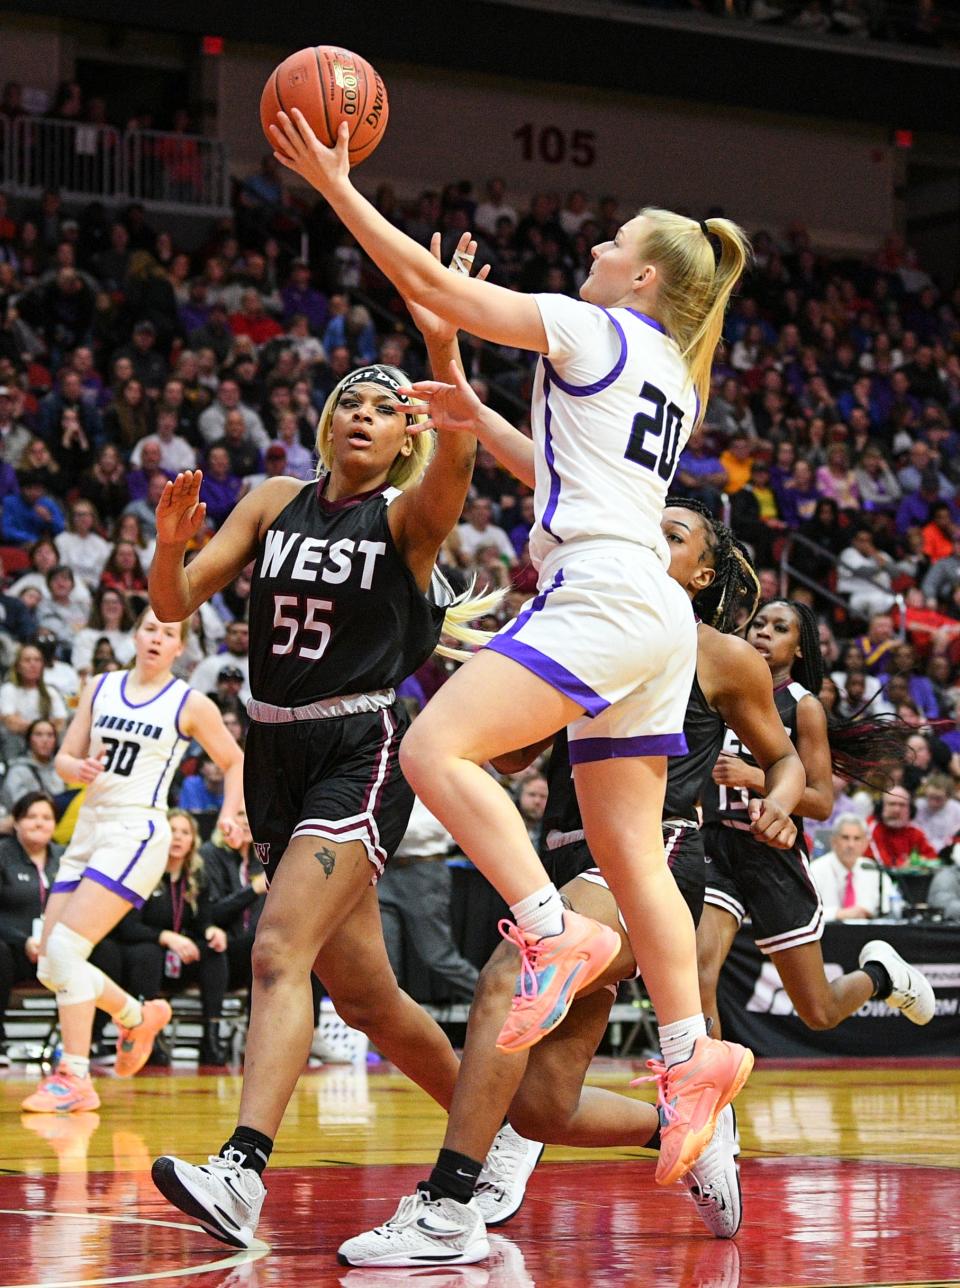 Iowa high school girls basketball fans can expect a tight race between Waterloo West and Johnston for the top spot.